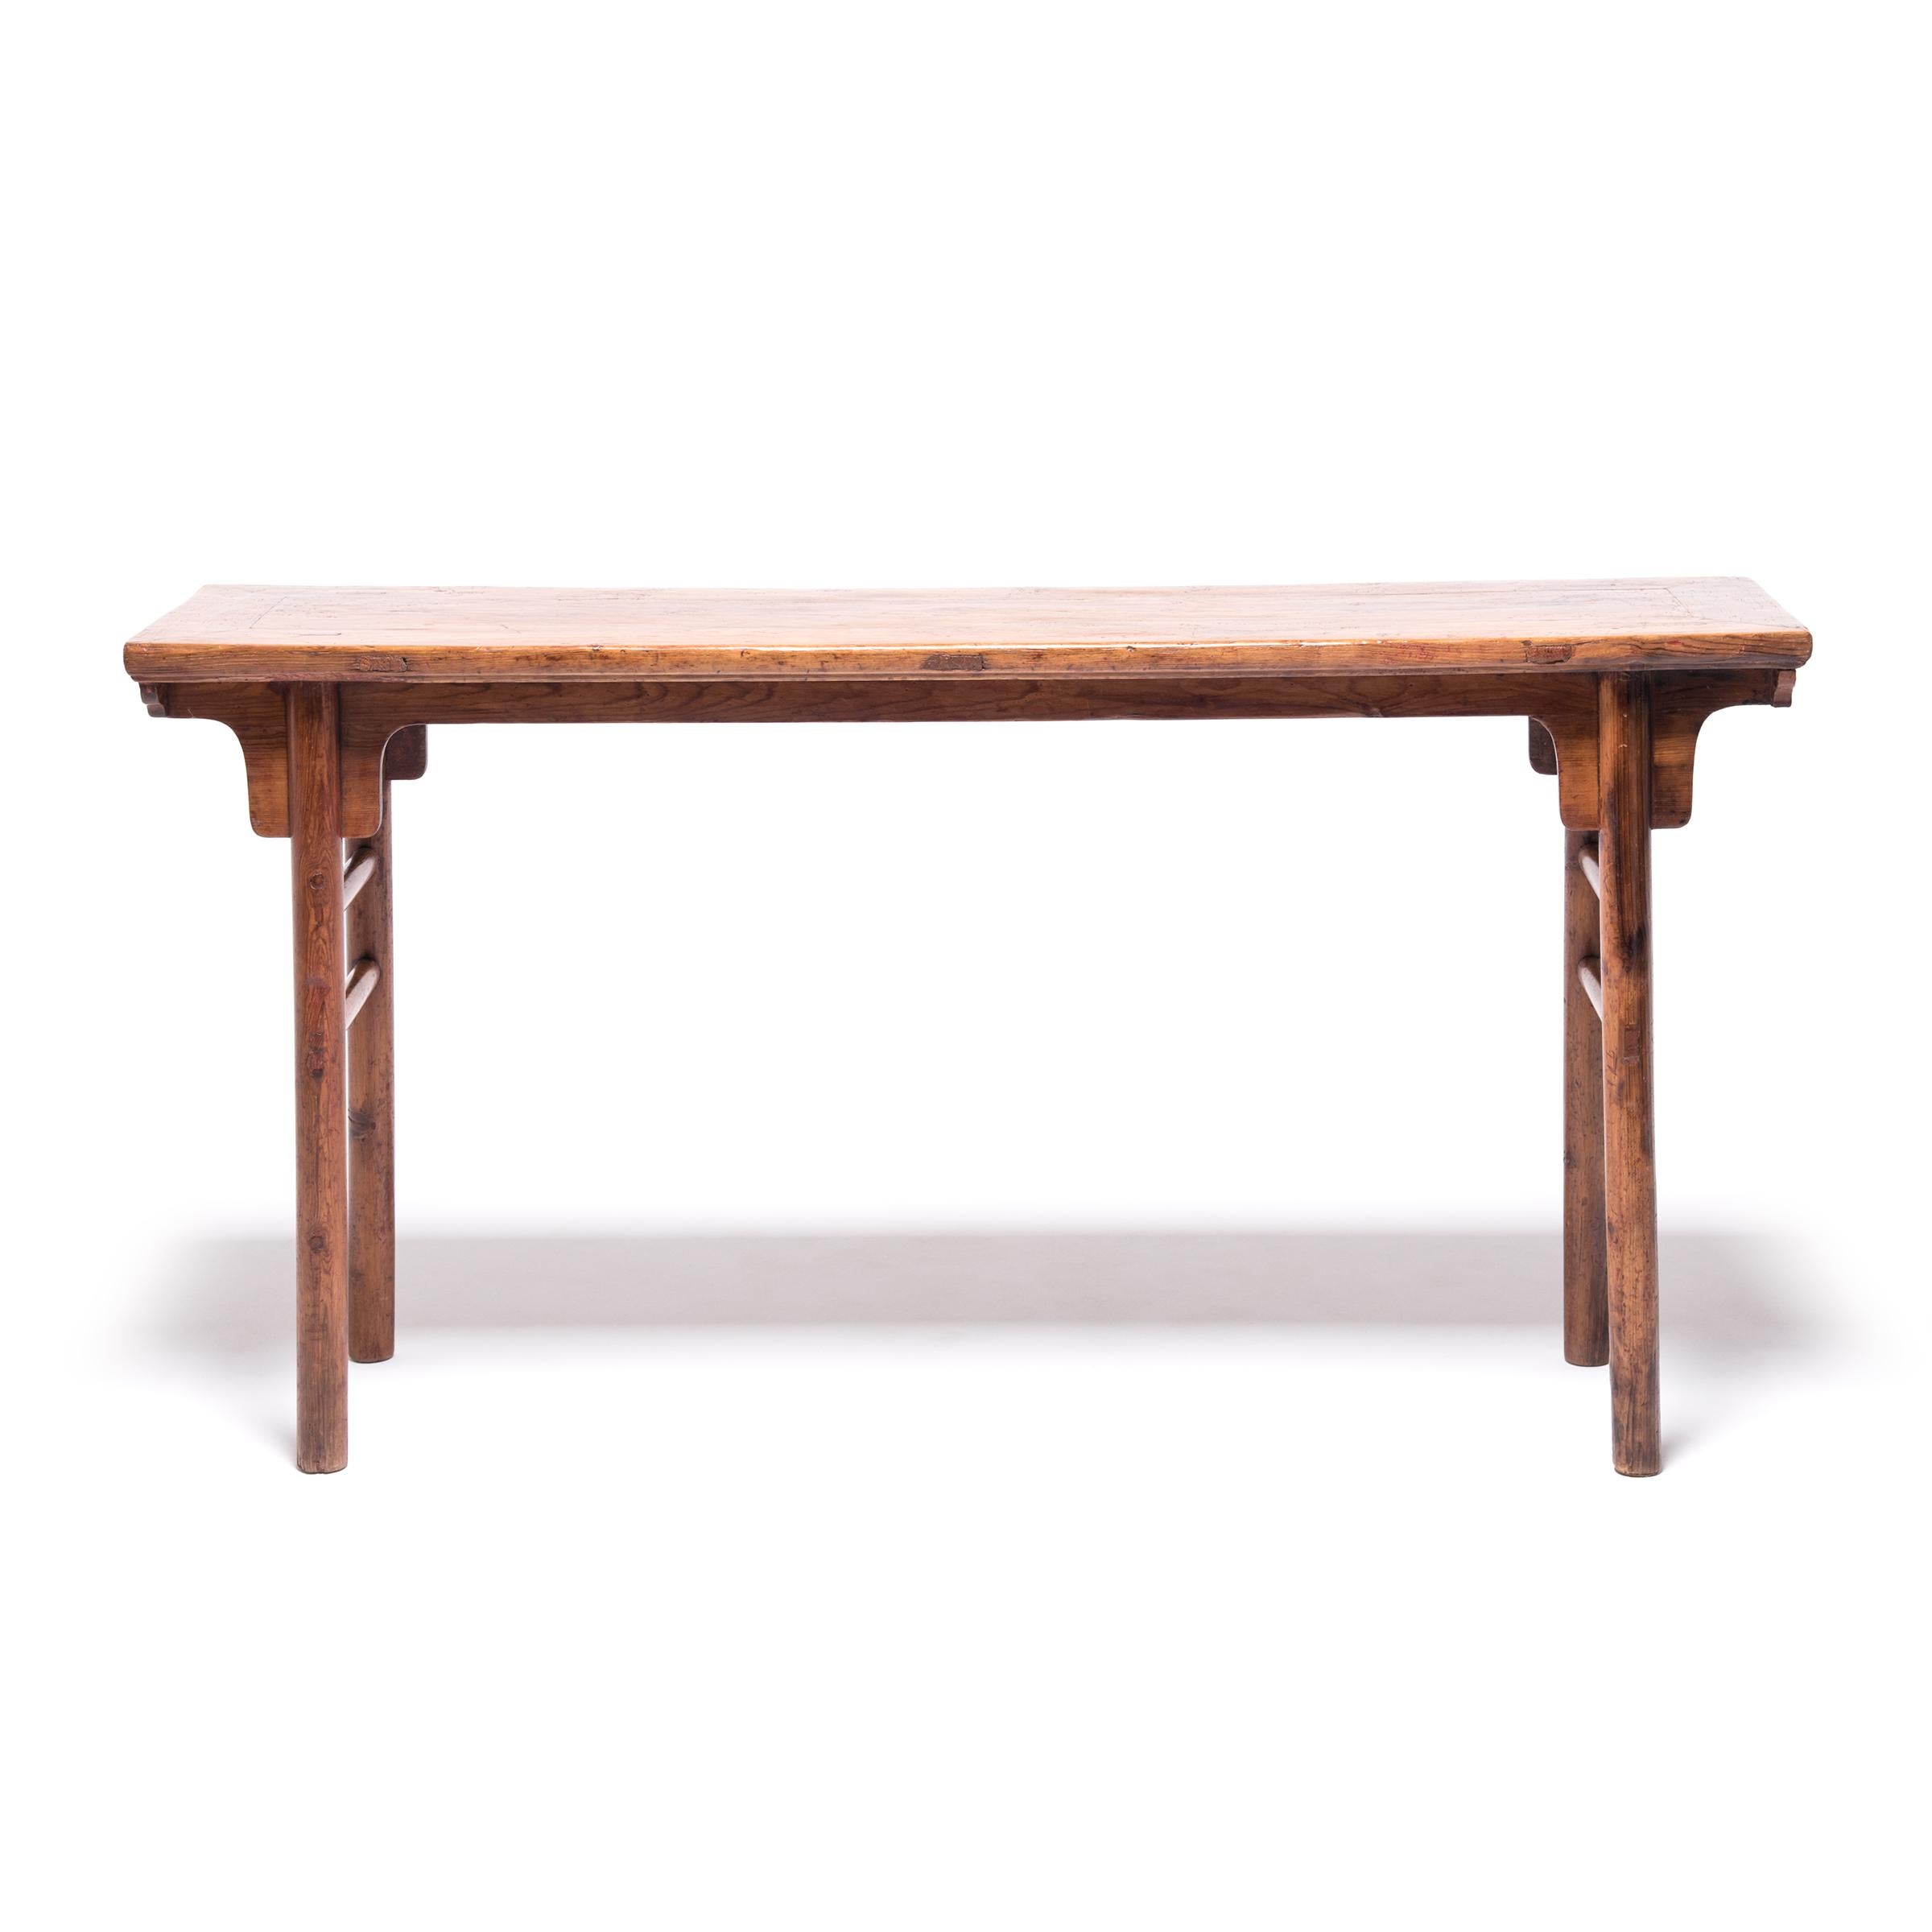 Over 150 years ago this splendid cypress wood table sat as the centerpiece in a family’s home in China's Shanxi province. It probably served as their altar, the place where they paid respects to their revered ancestors. The elegant table is inspired